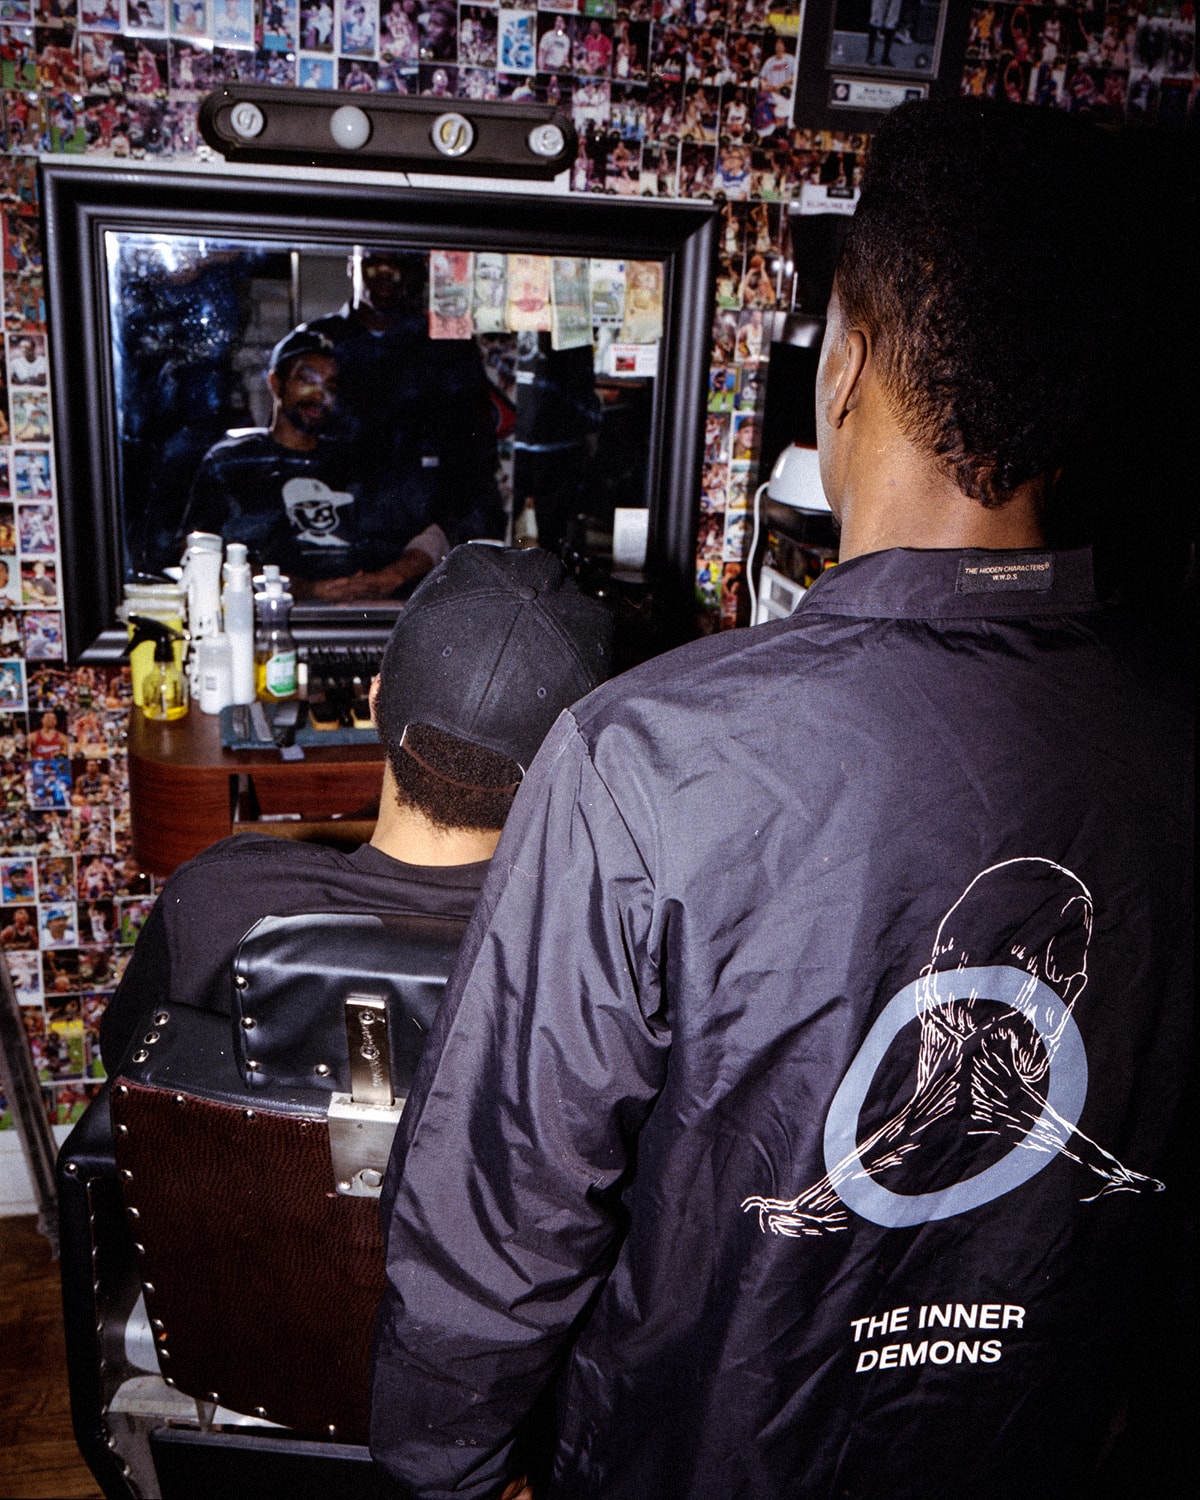 Hidden Characters "The Inner Demons" Capsule chicago midwest hypebeast forums